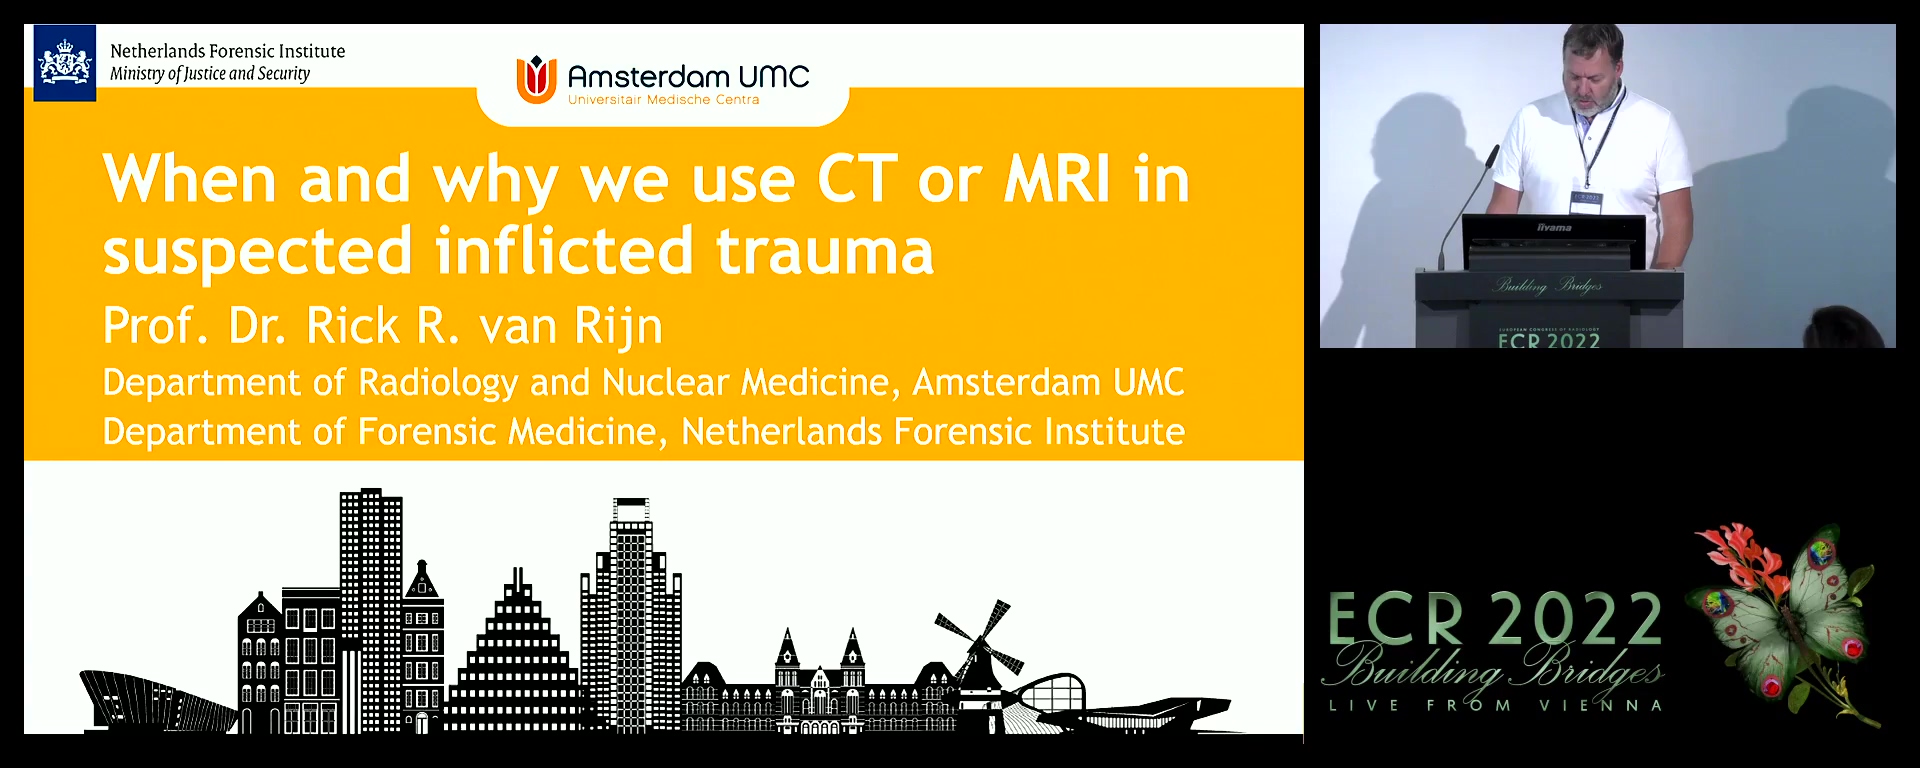 When and why we use CT or MRI in suspected inflicted trauma